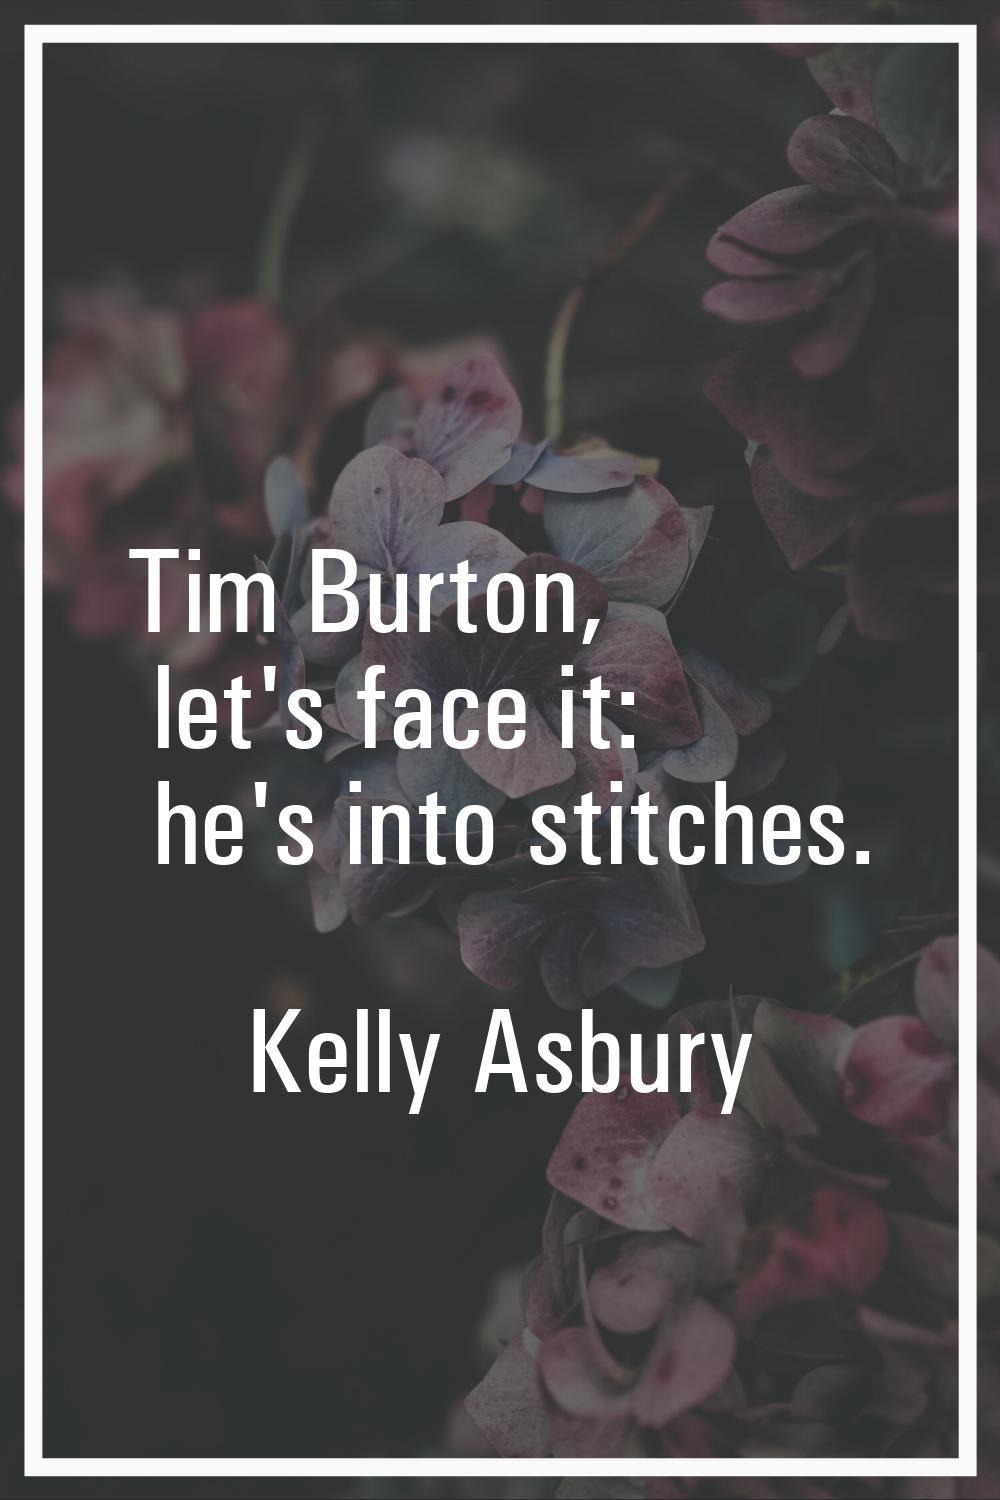 Tim Burton, let's face it: he's into stitches.